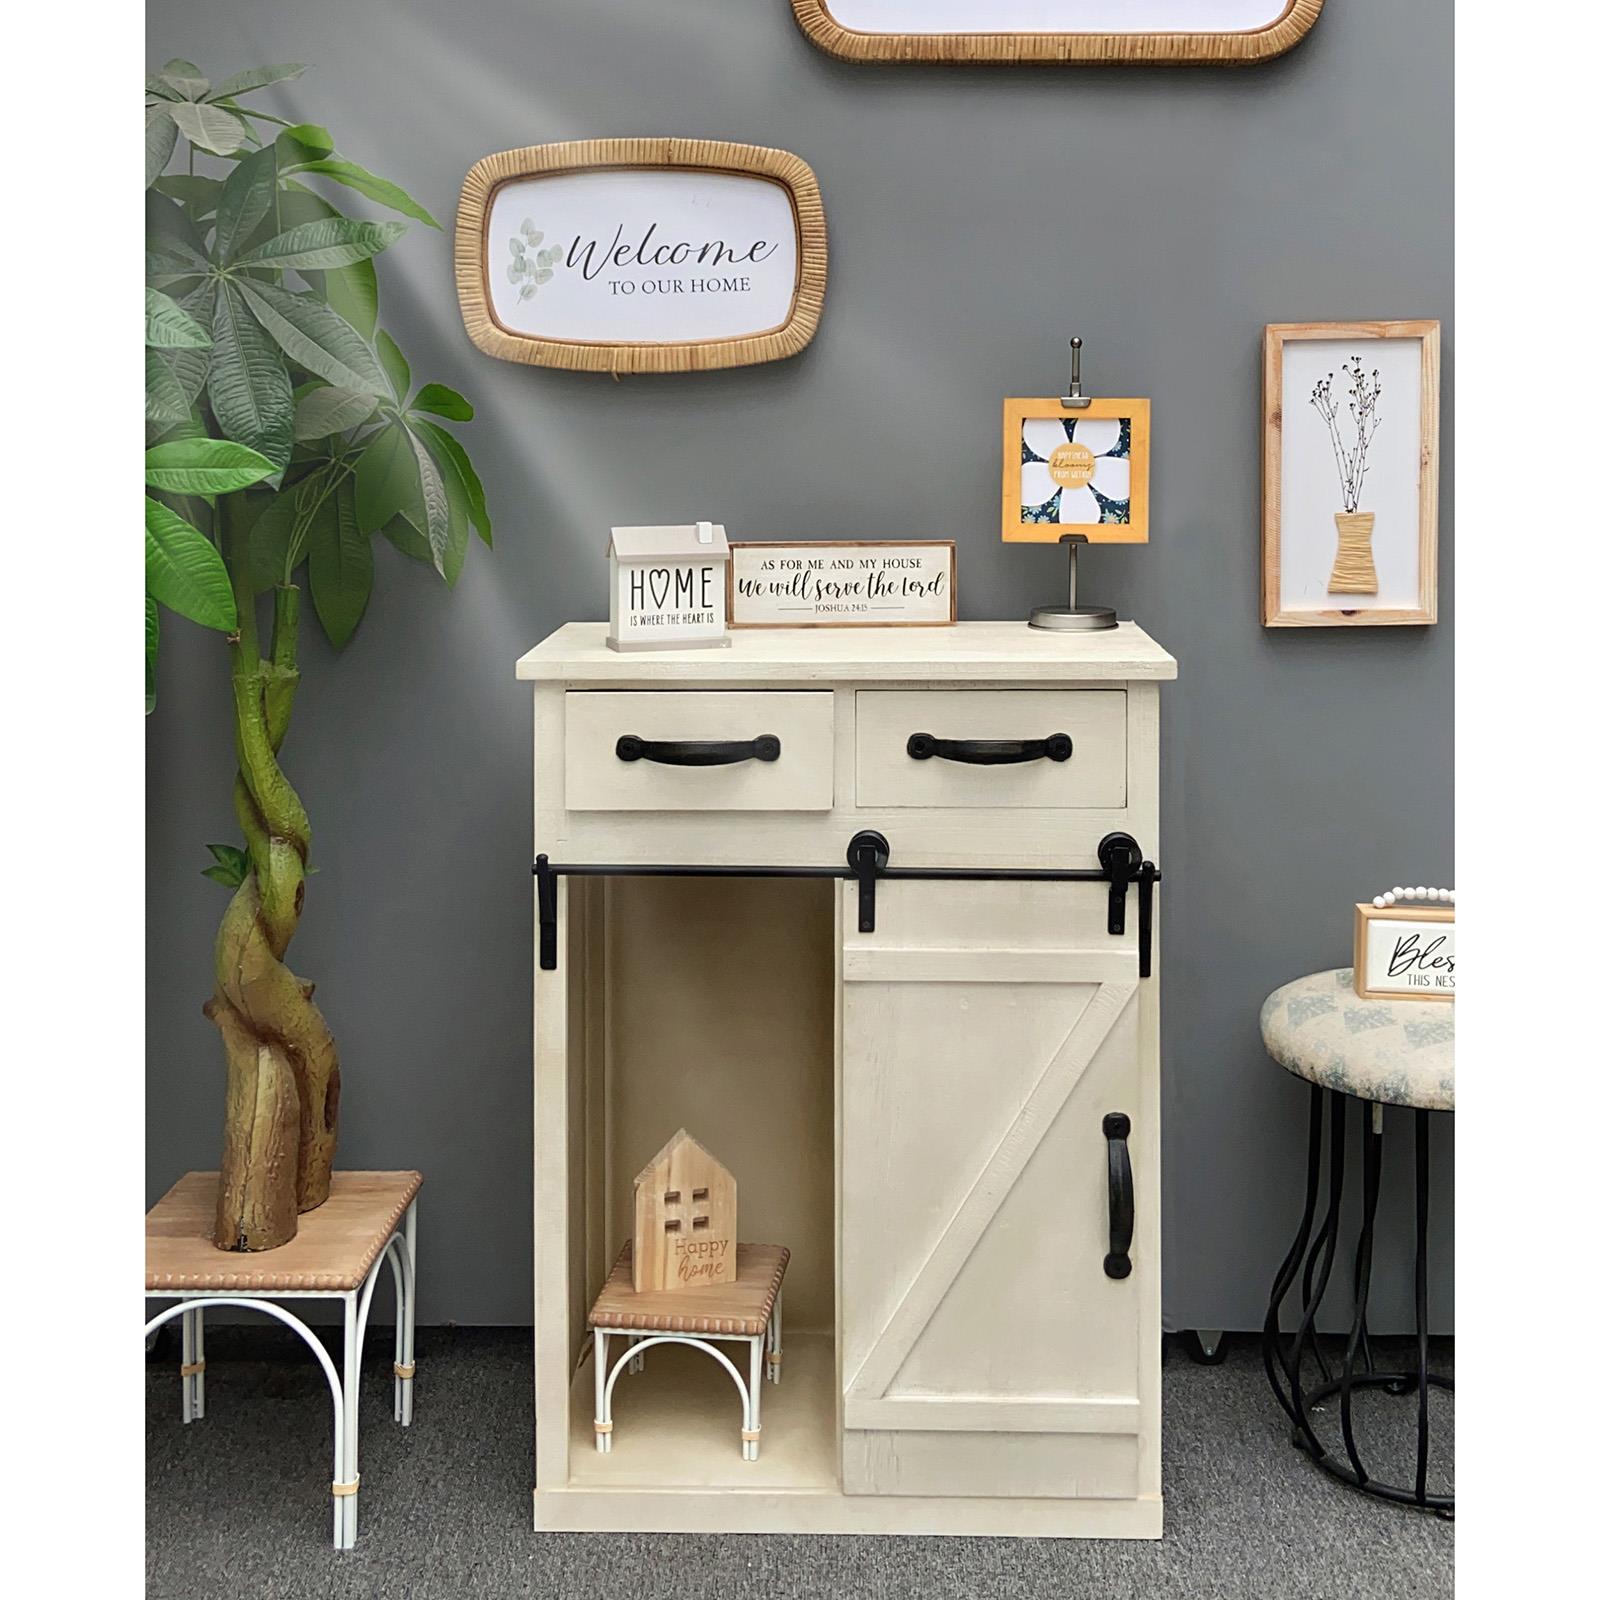 Zimtown Wood Accent Chest Sideboard Cabinet Entryway Table Retro Style with Farmhouse Single Barn Door, 2 Drawers White - image 4 of 10